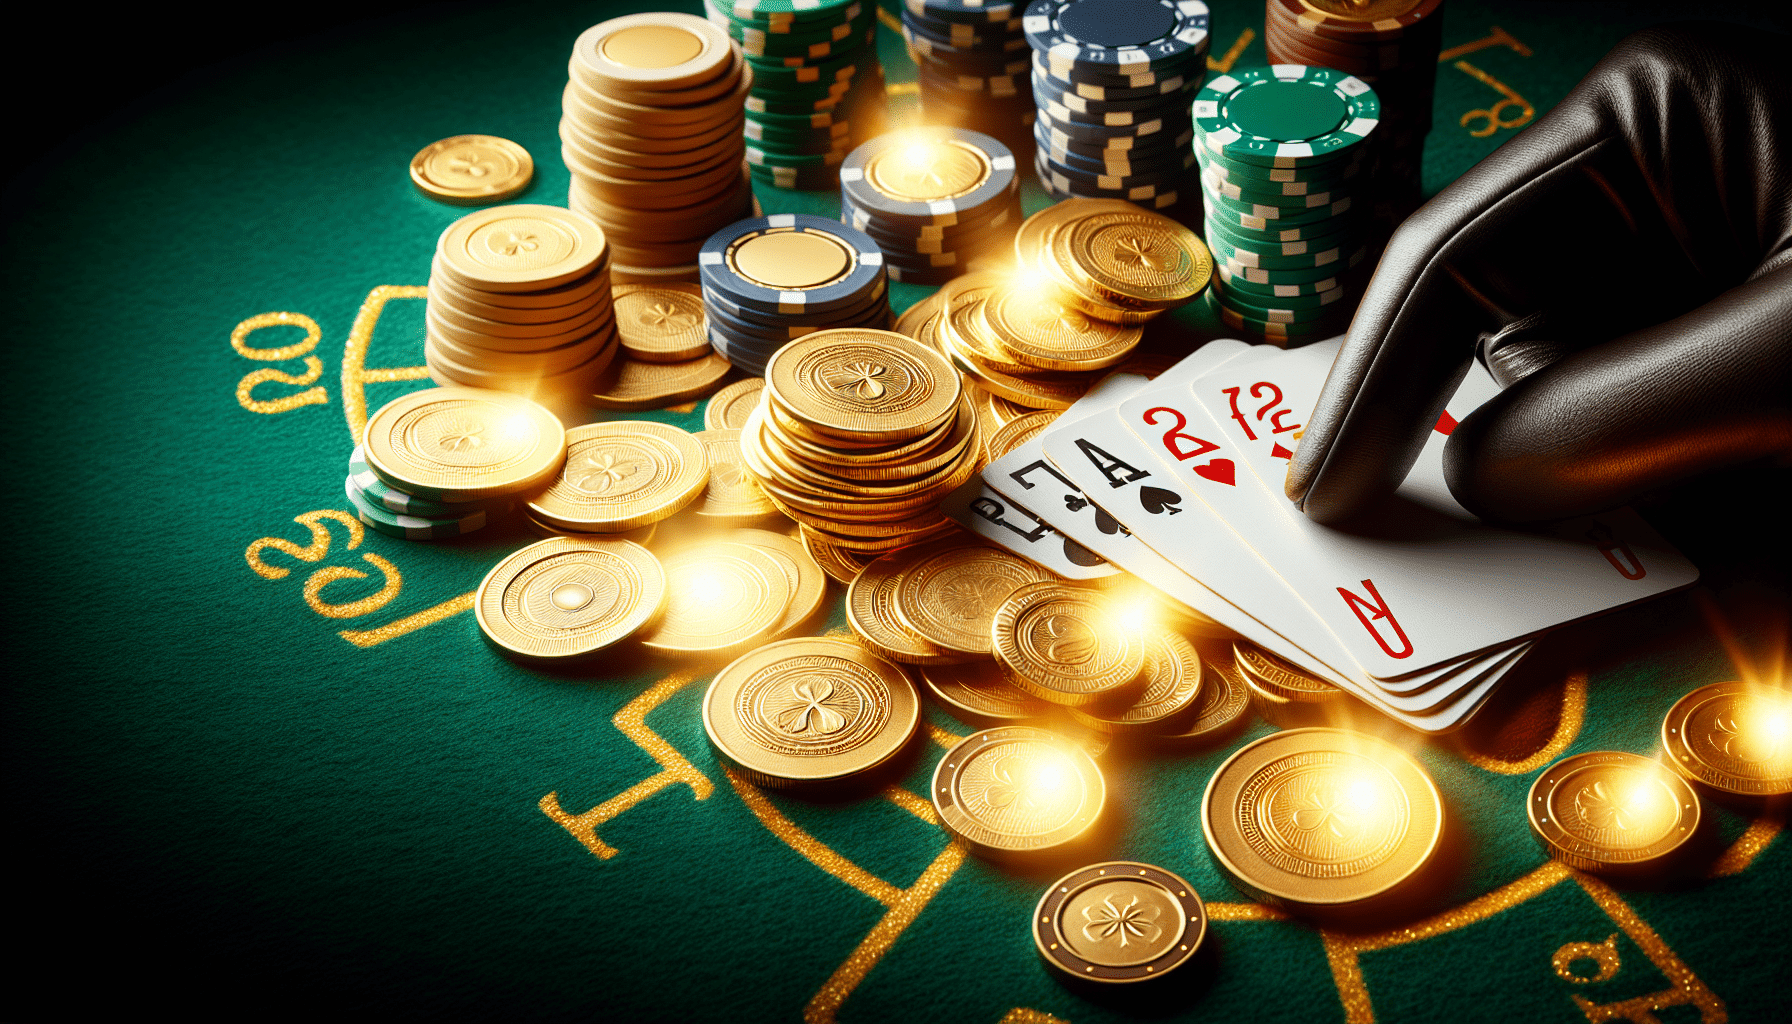 How Do I Withdraw My Winnings From An Online Casino?